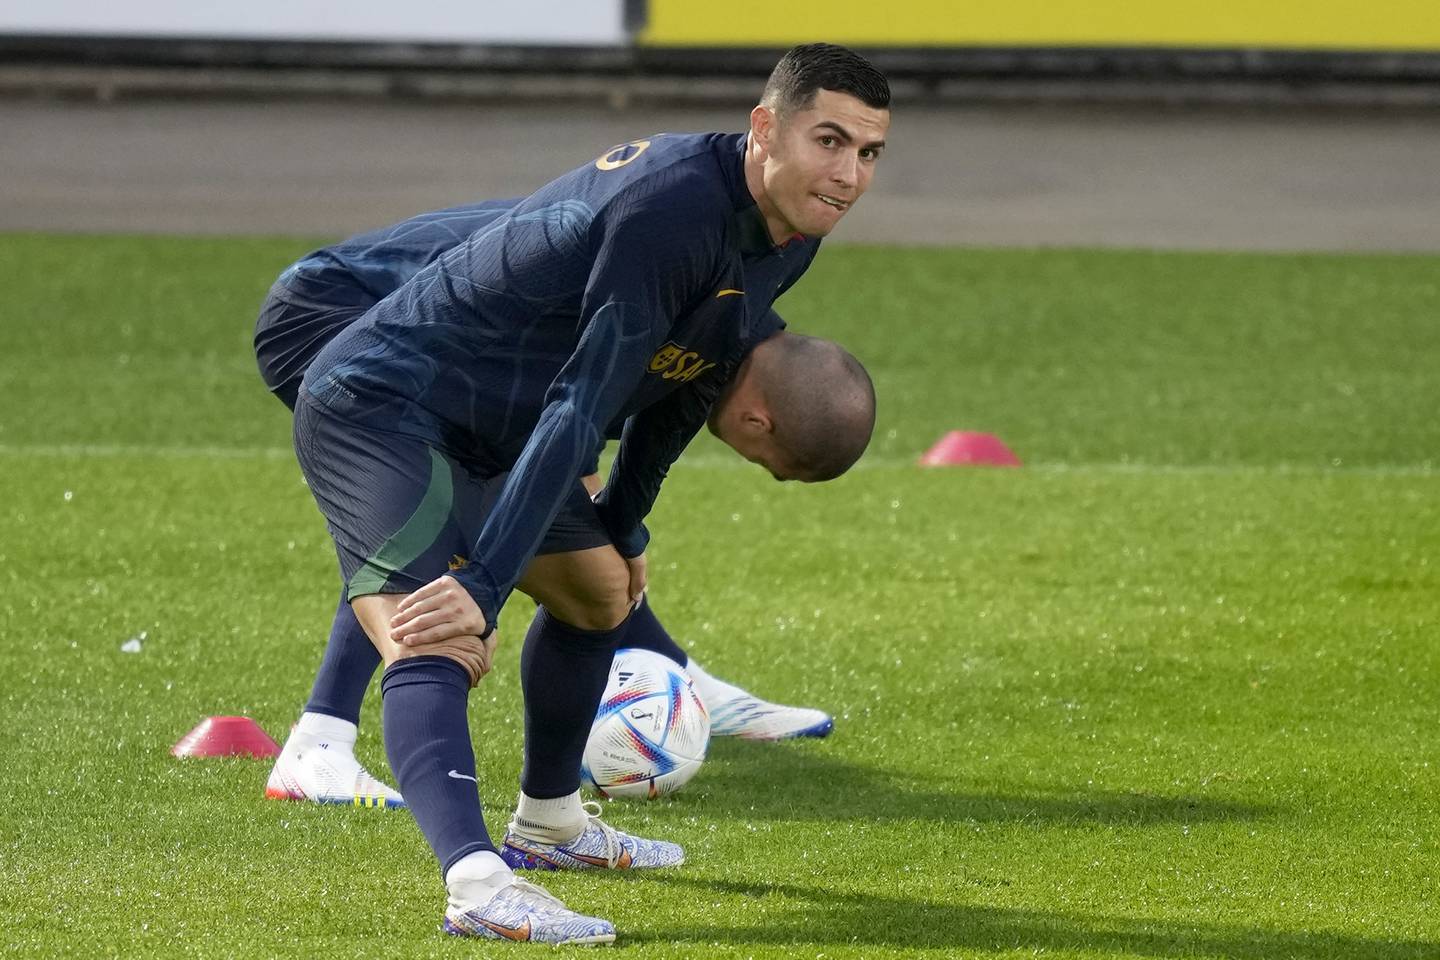 Cristiano Ronaldo stretches with teammate Pepe, in the background, during a Portugal training session Monday, Nov. 14, 2022, in Lisbon.